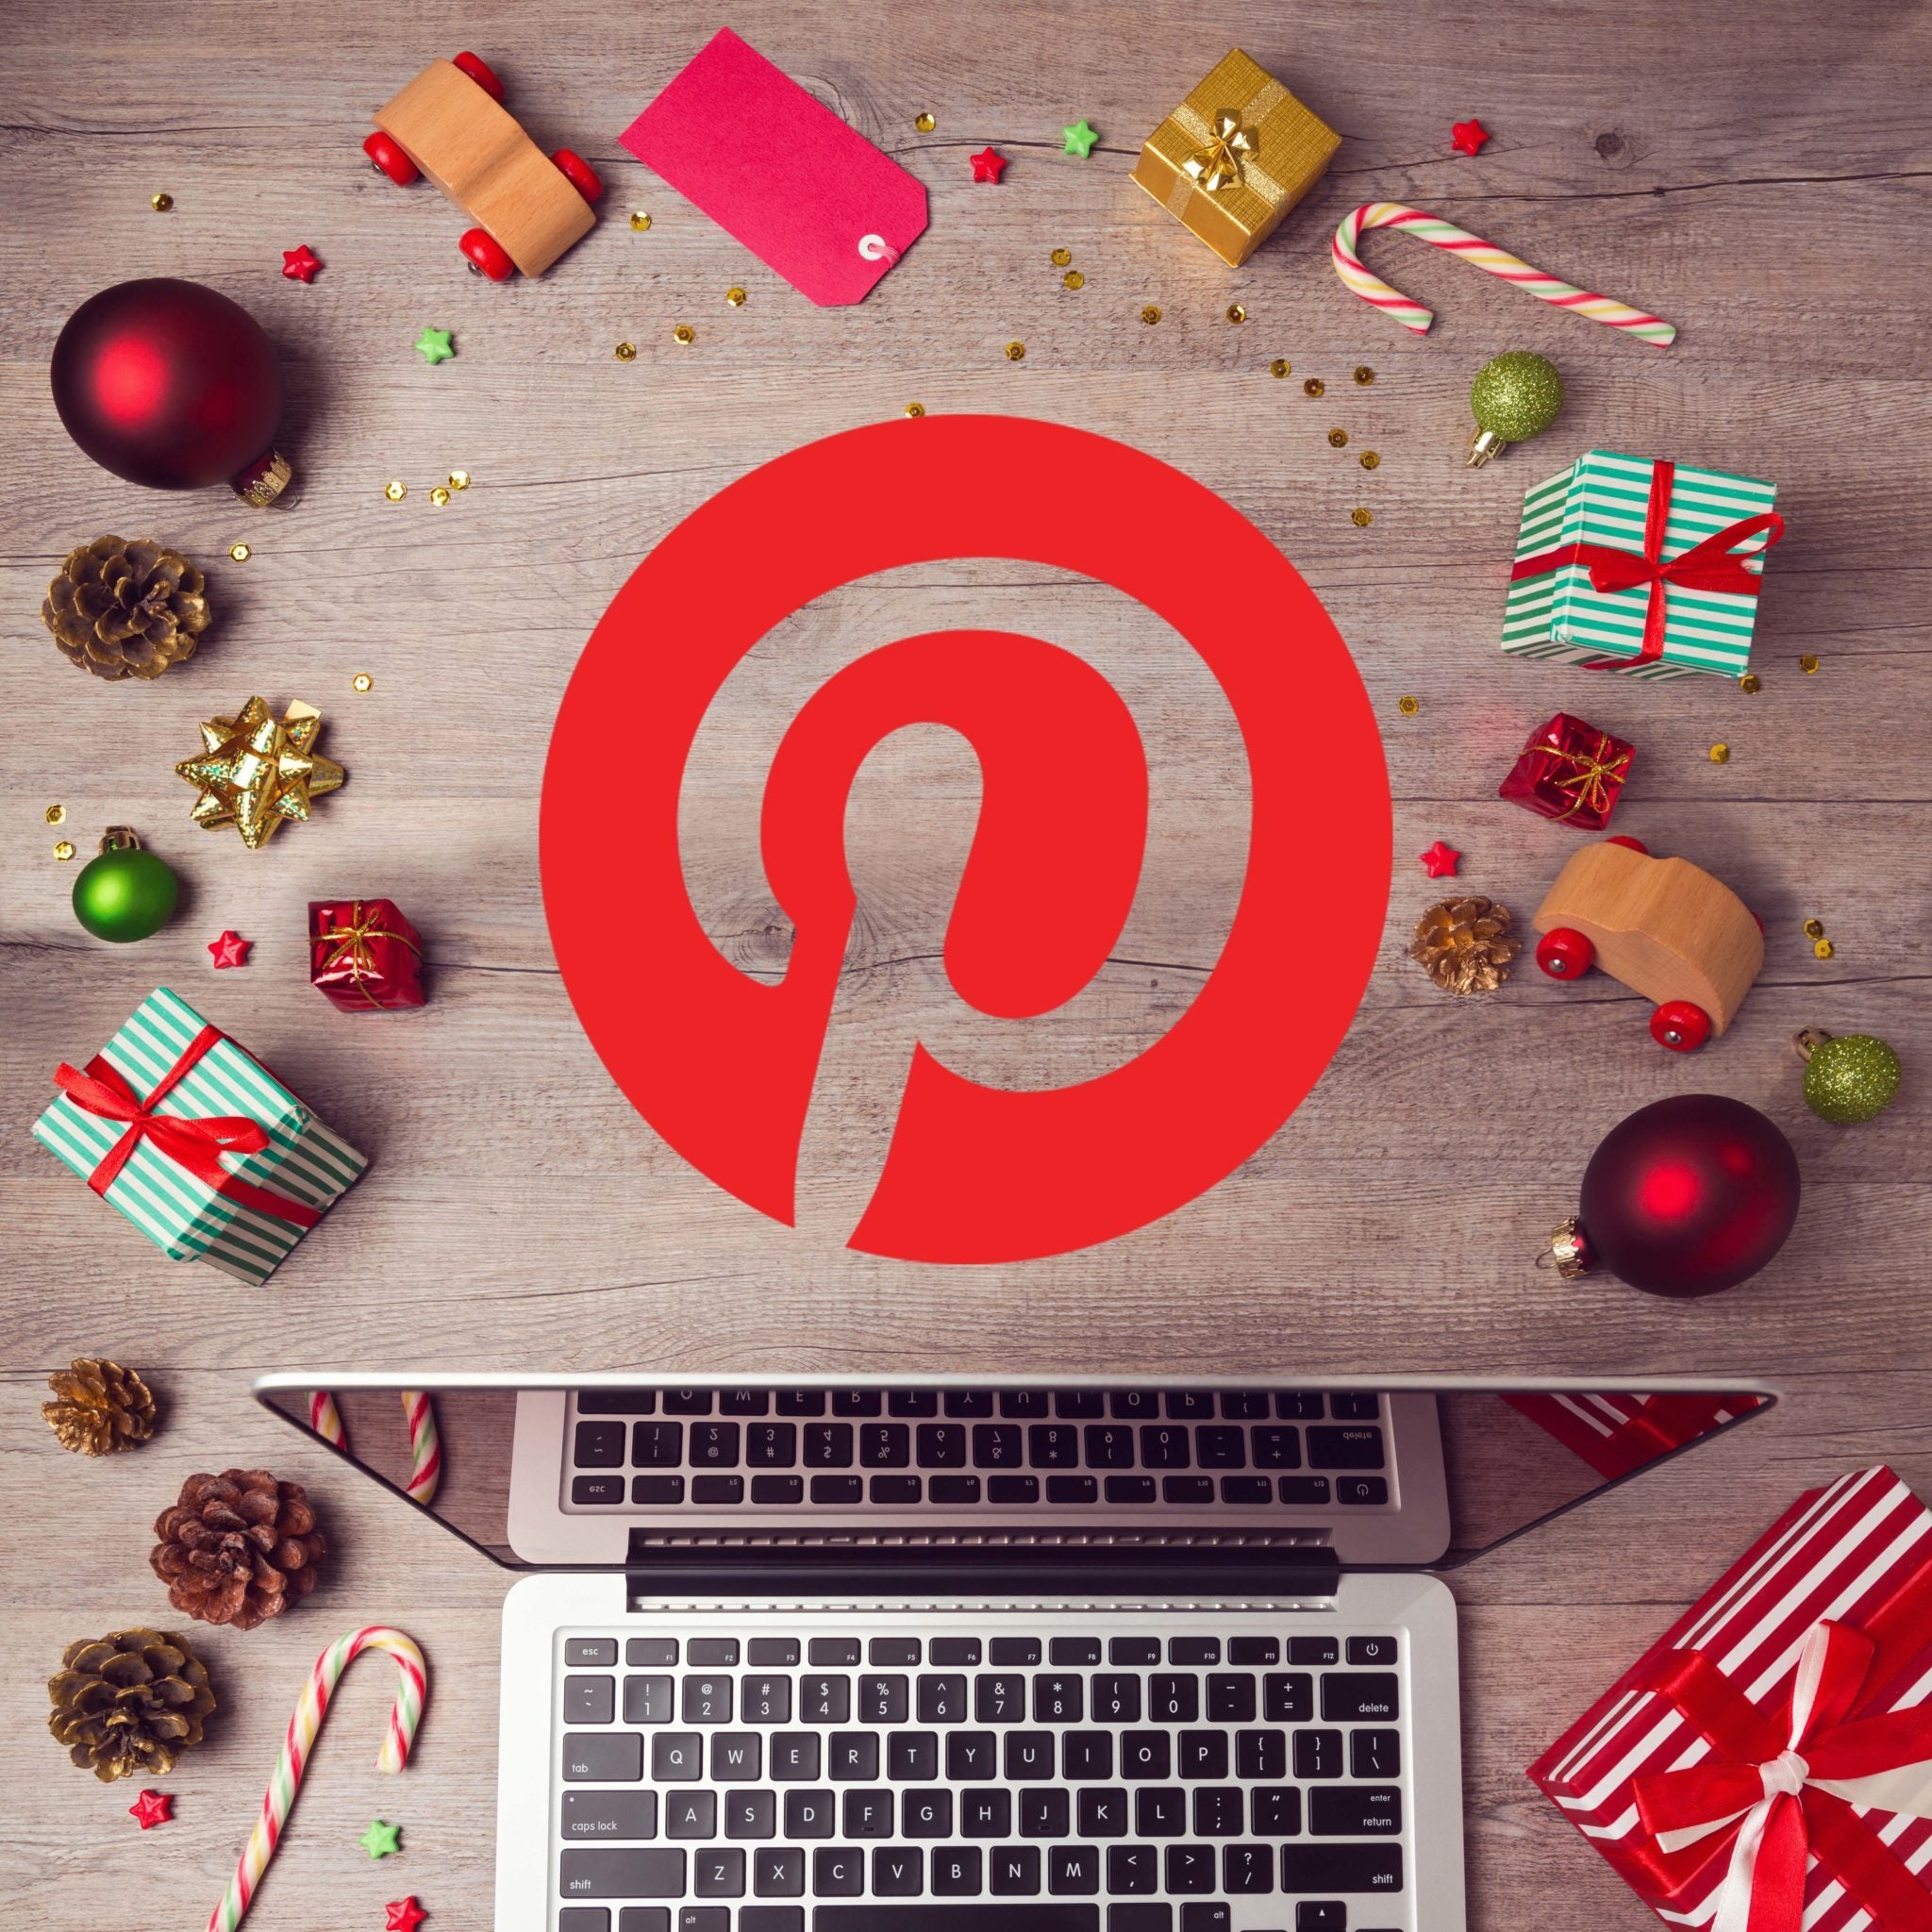 Pinterest: Best Practices for Holiday Marketing